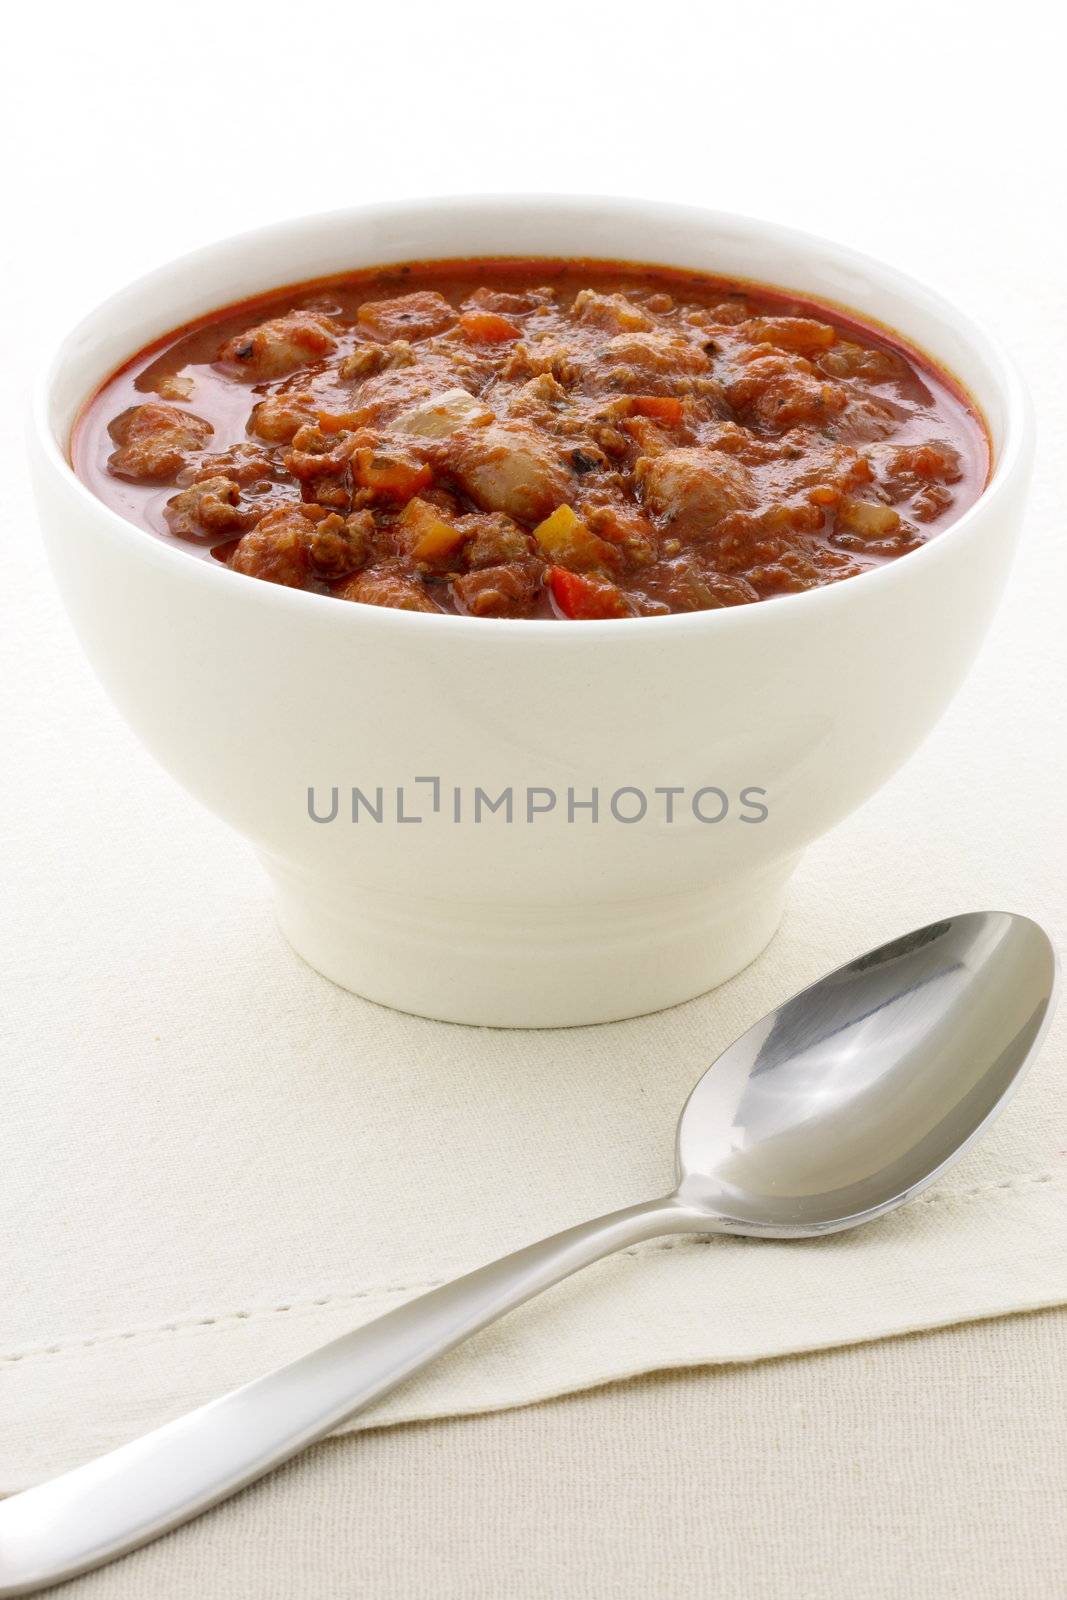 Gourmet chili beans with extra lean beef by tacar